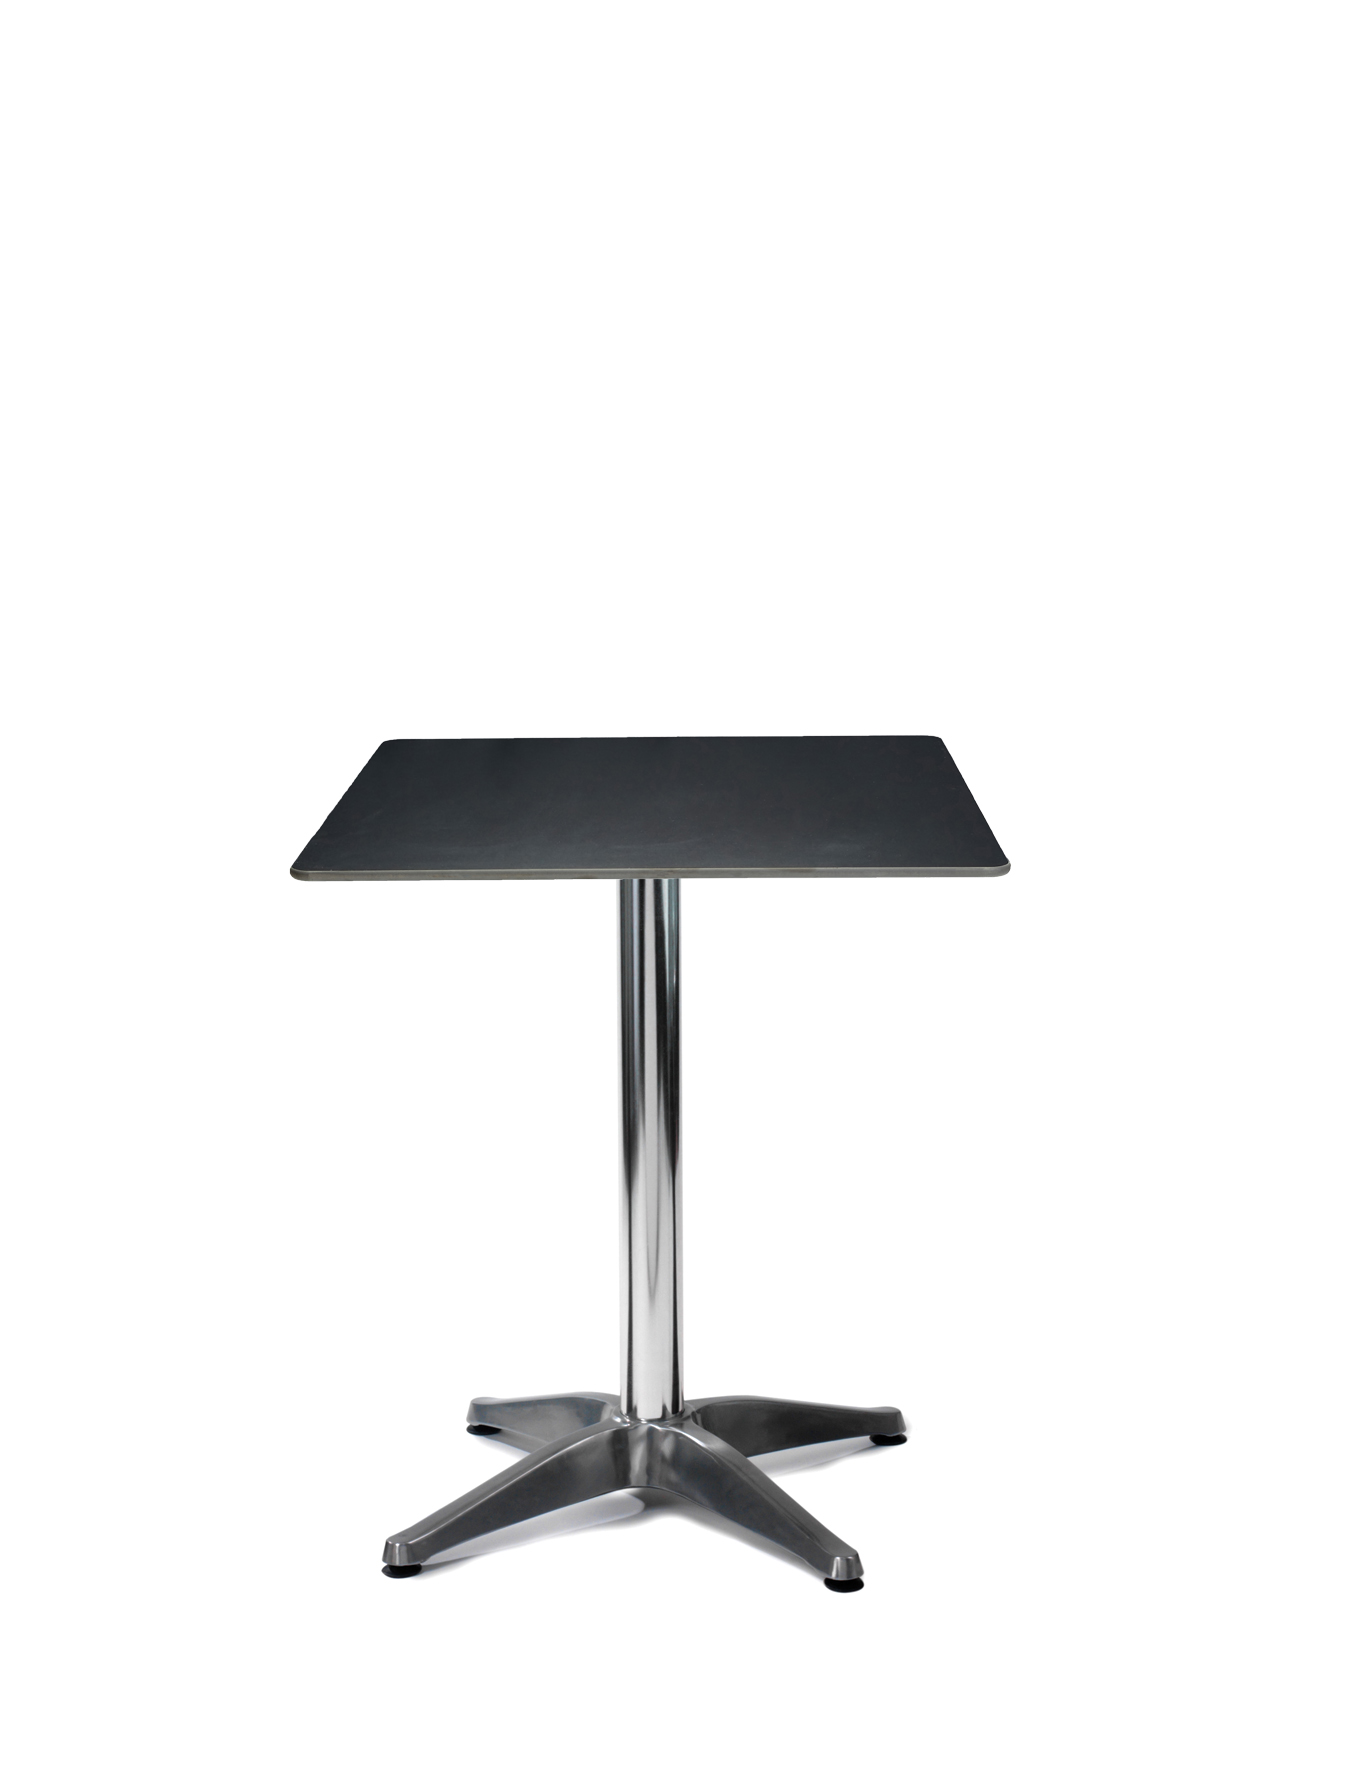 INDOOR TABLE & BASE 600X600 BLACK MARBLE EFFECT TABLE&BASE 2324